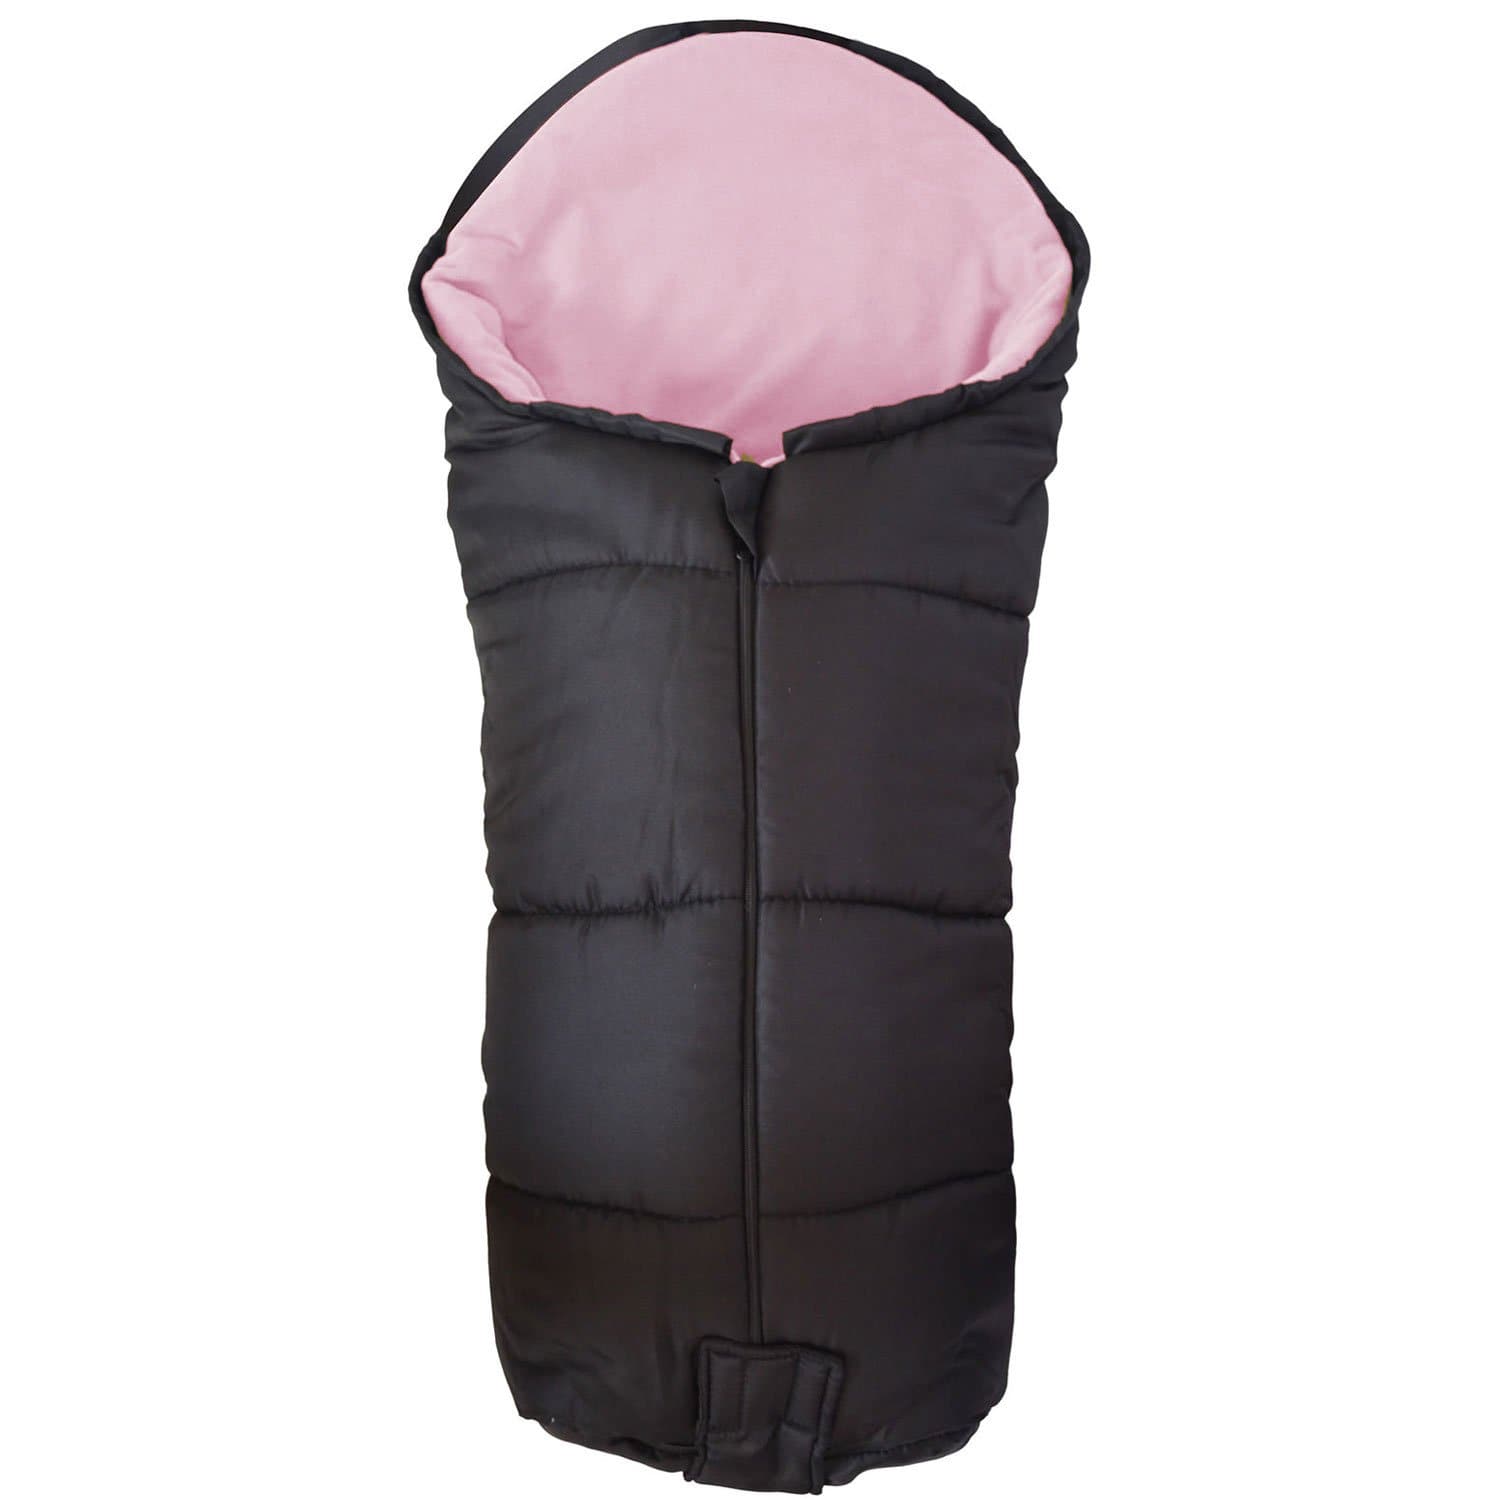 Deluxe Footmuff / Cosy Toes Compatible with Kinderkraft - Light Pink / Fits All Models | For Your Little One